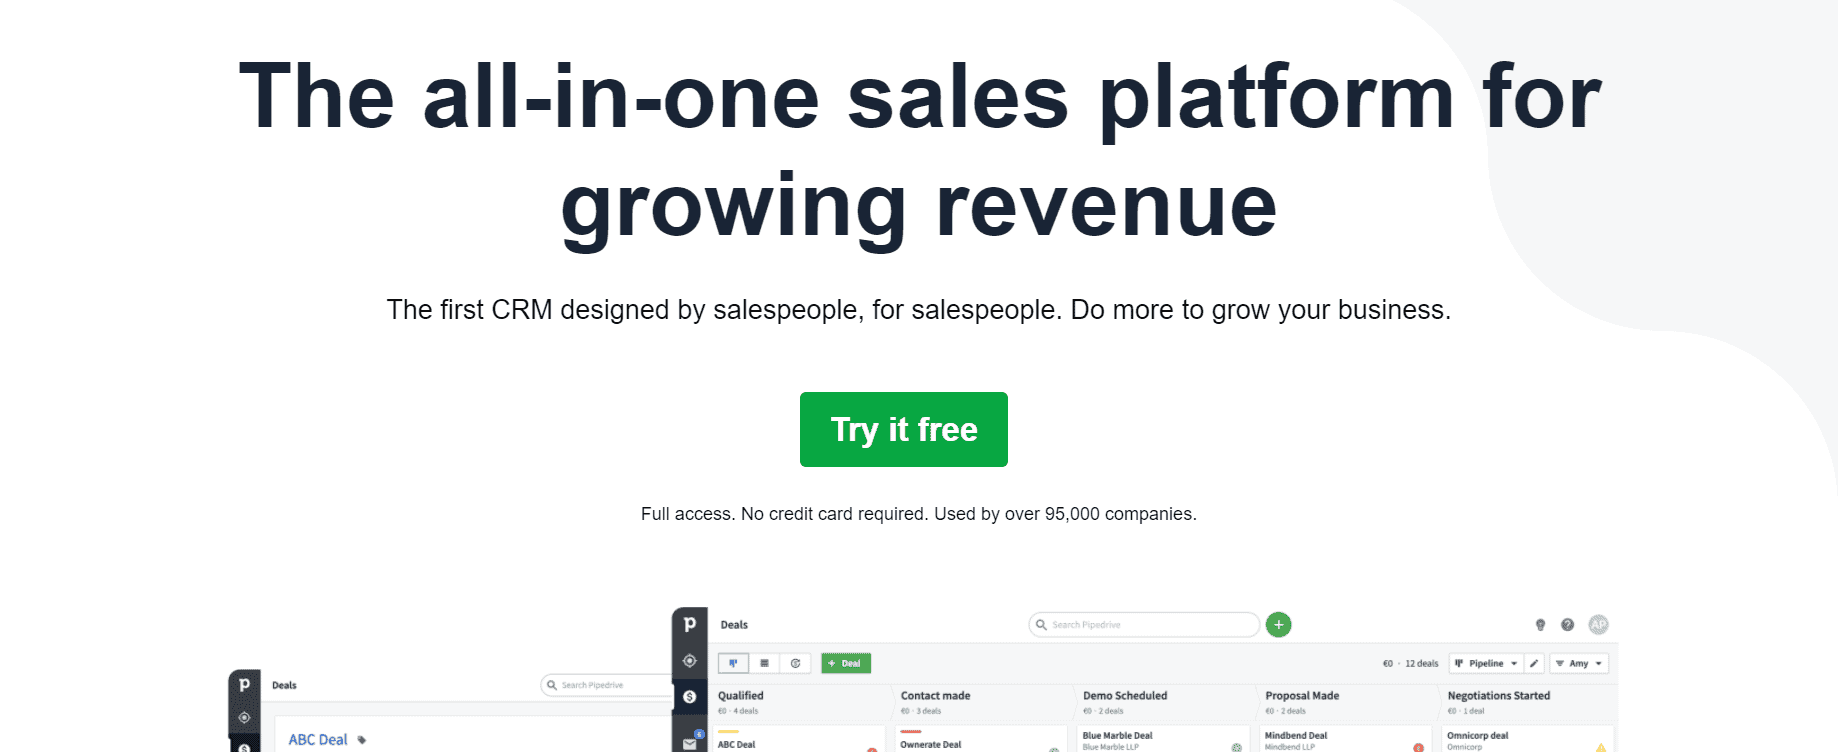 Pipedrive easy to use CRM